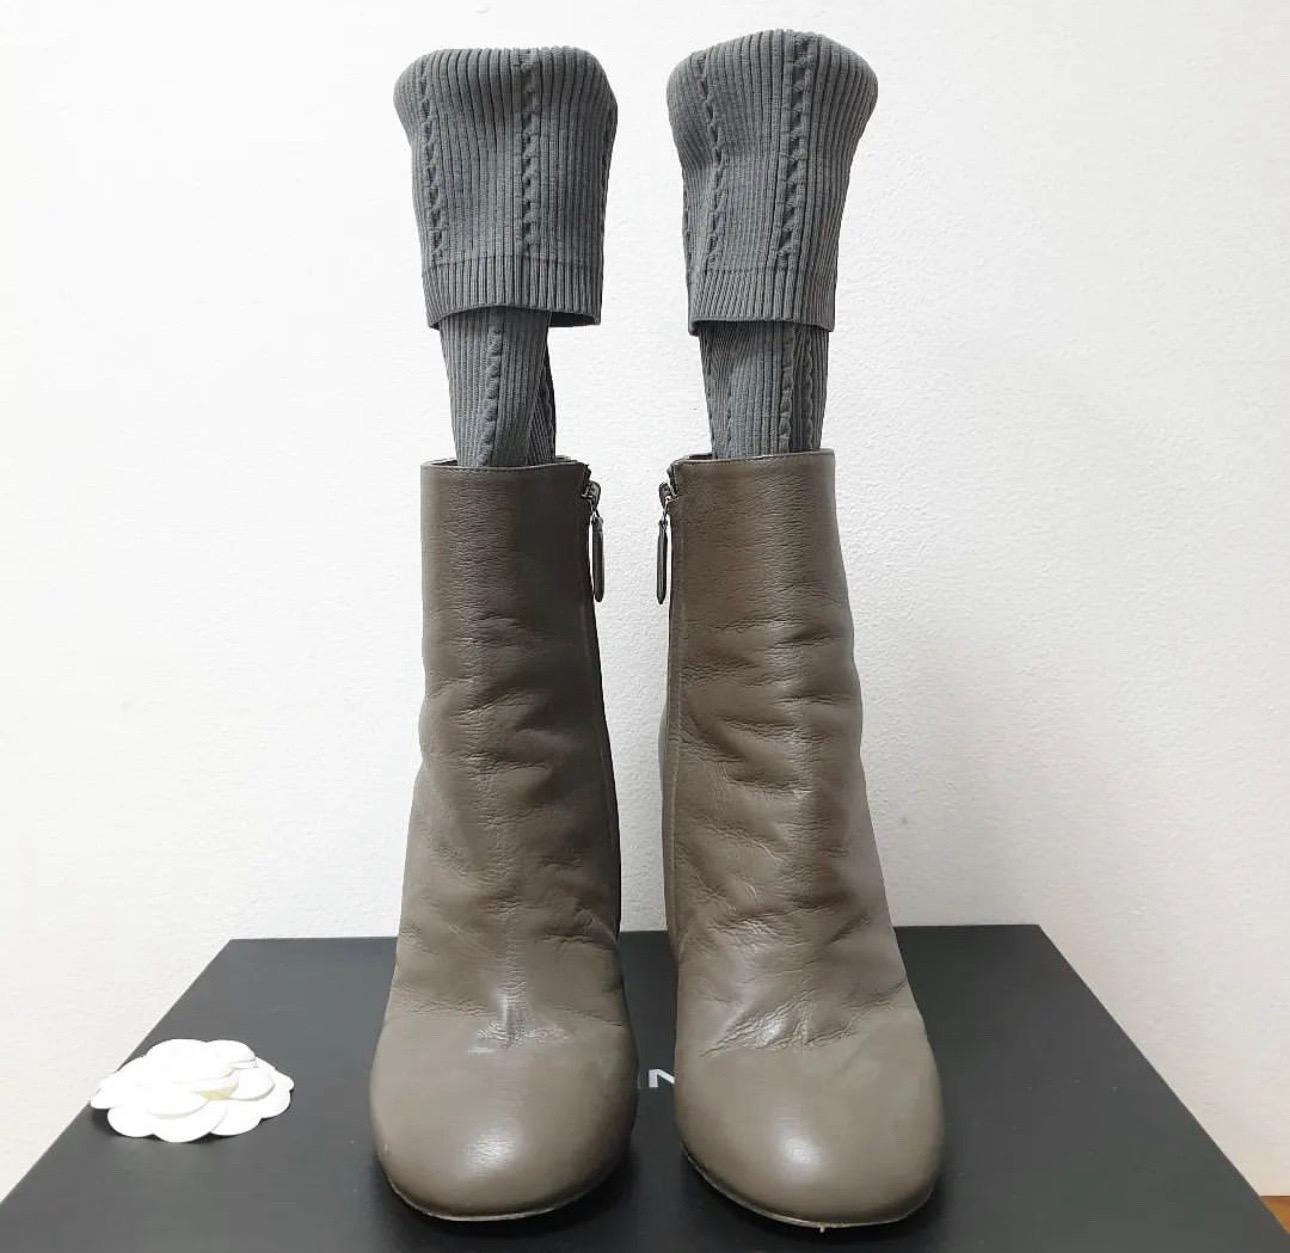 Chanel Leather Texlile Socks Heeled Boots In Good Condition For Sale In Krakow, PL